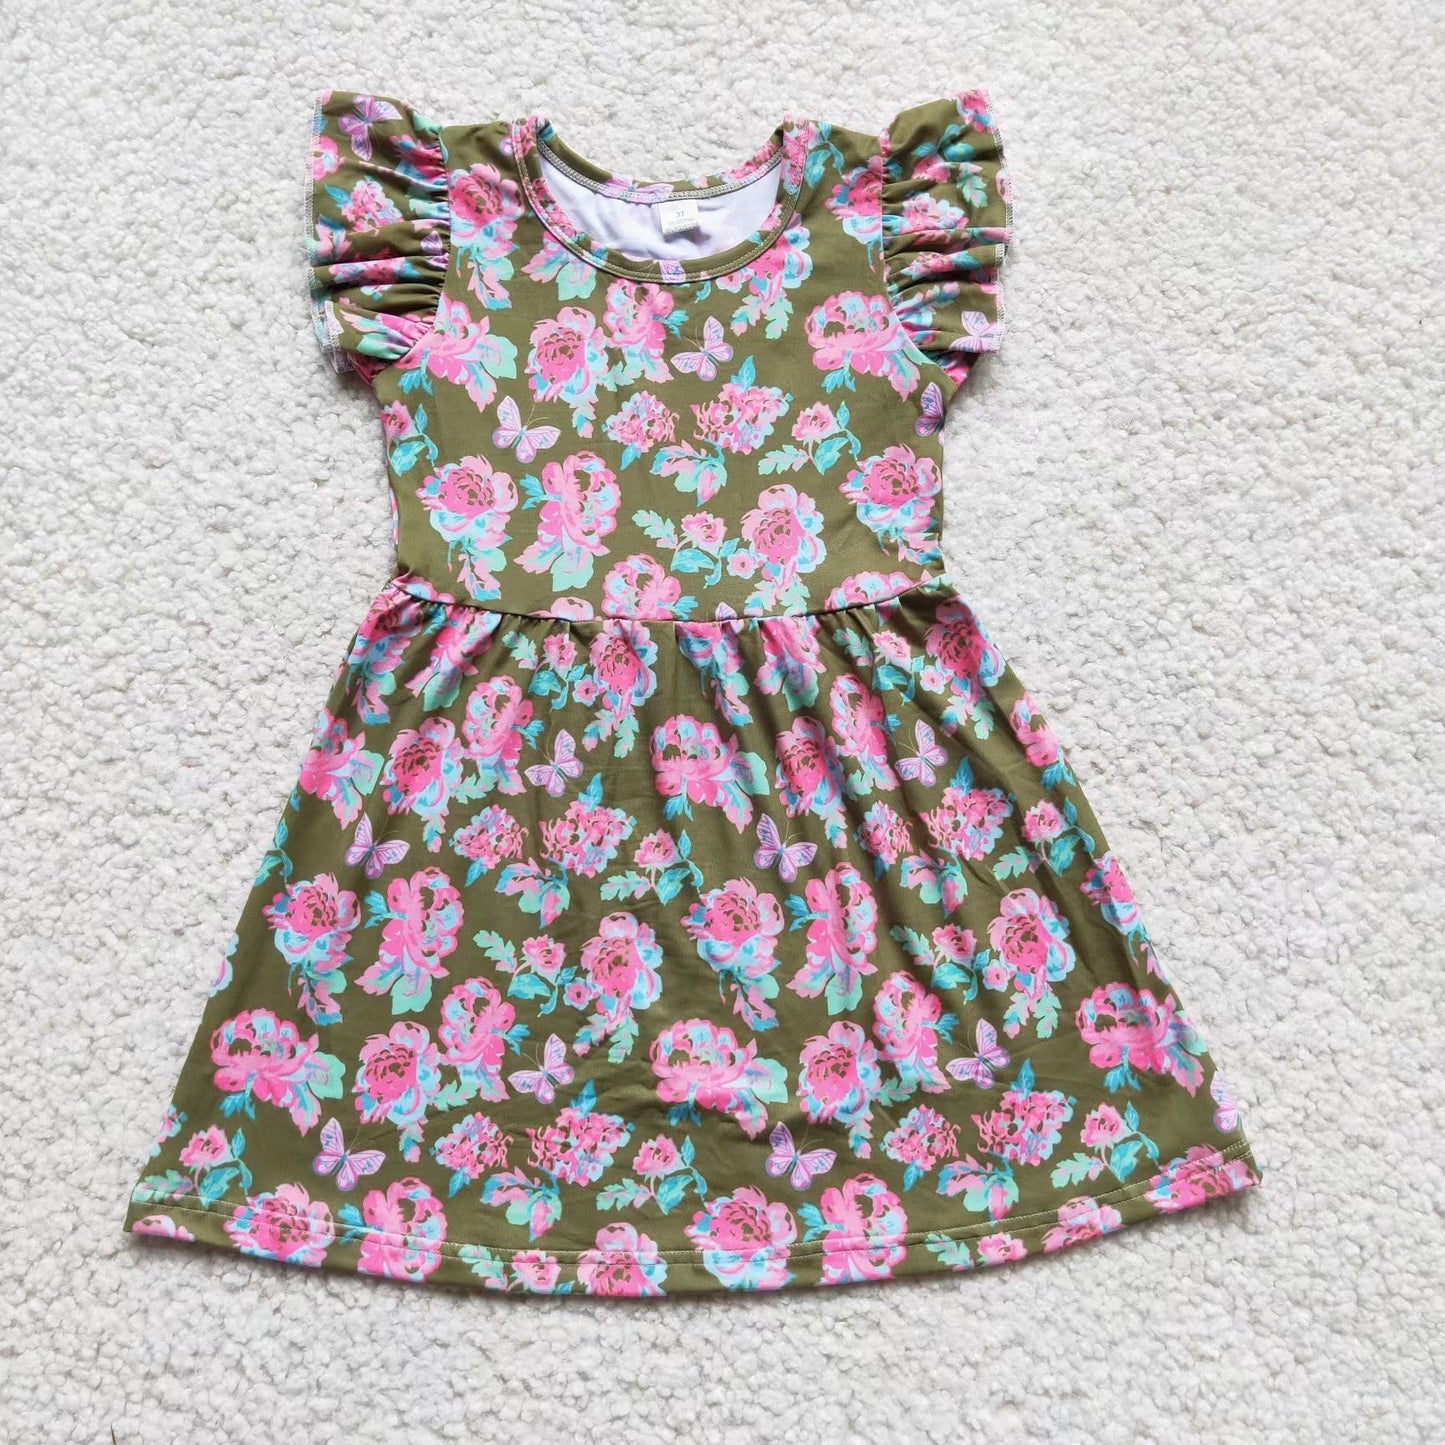 Baby girls pink floral pearl dresses